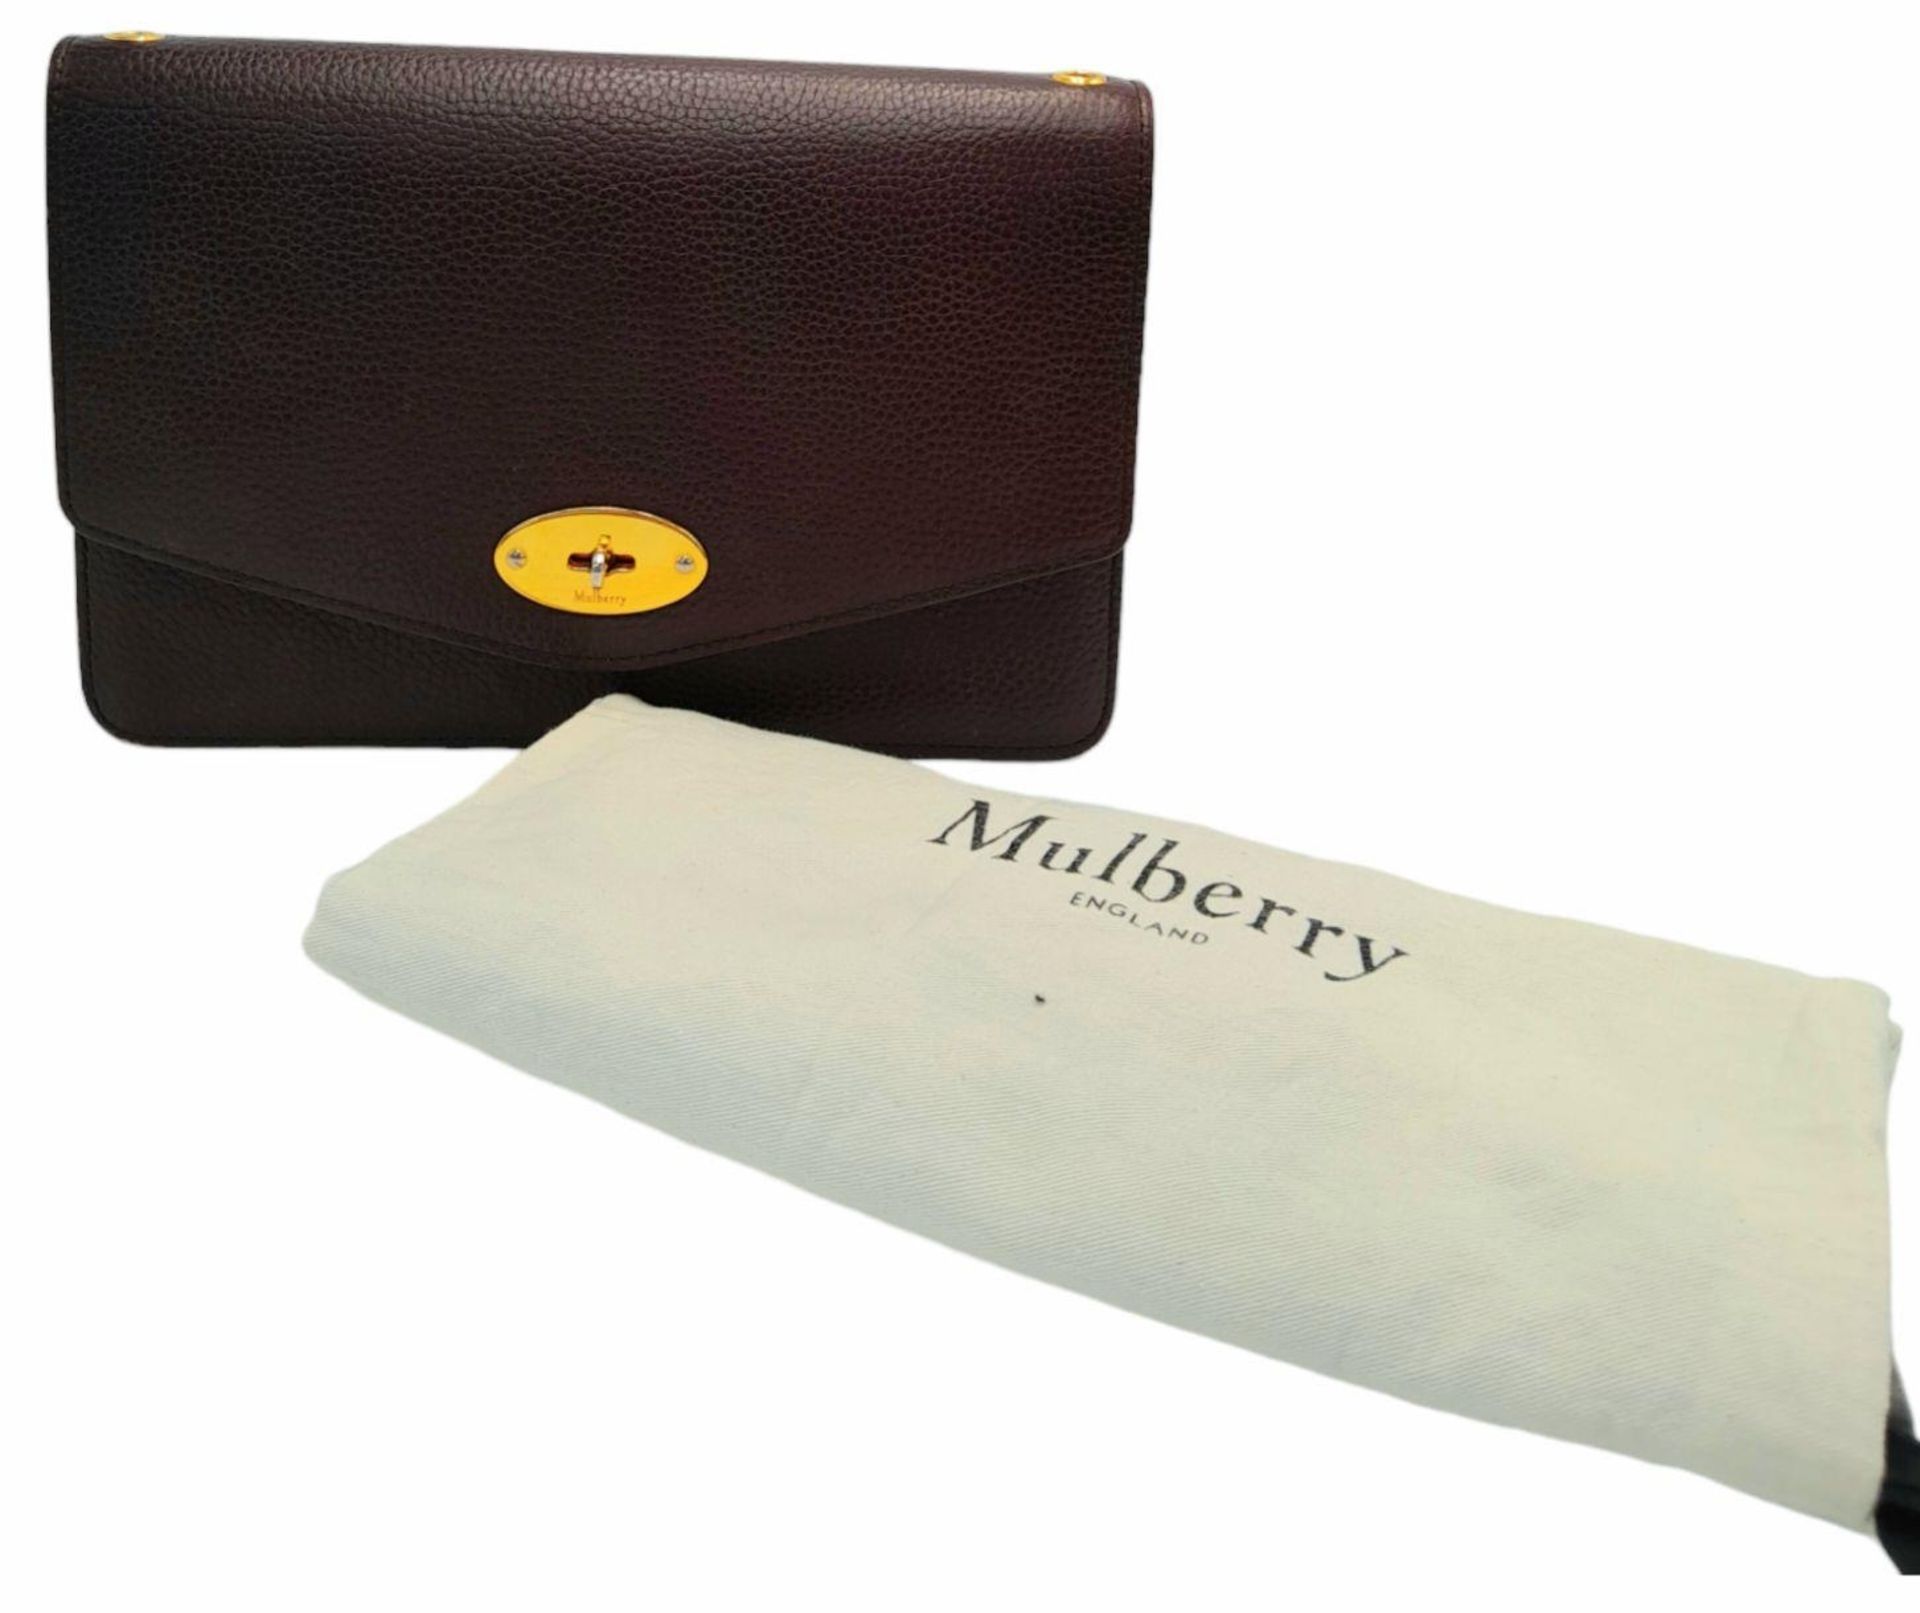 A Mulberry Oxblood Darley Bag. Leather exterior with gold-toned hardware and twist lock closure. - Bild 8 aus 10